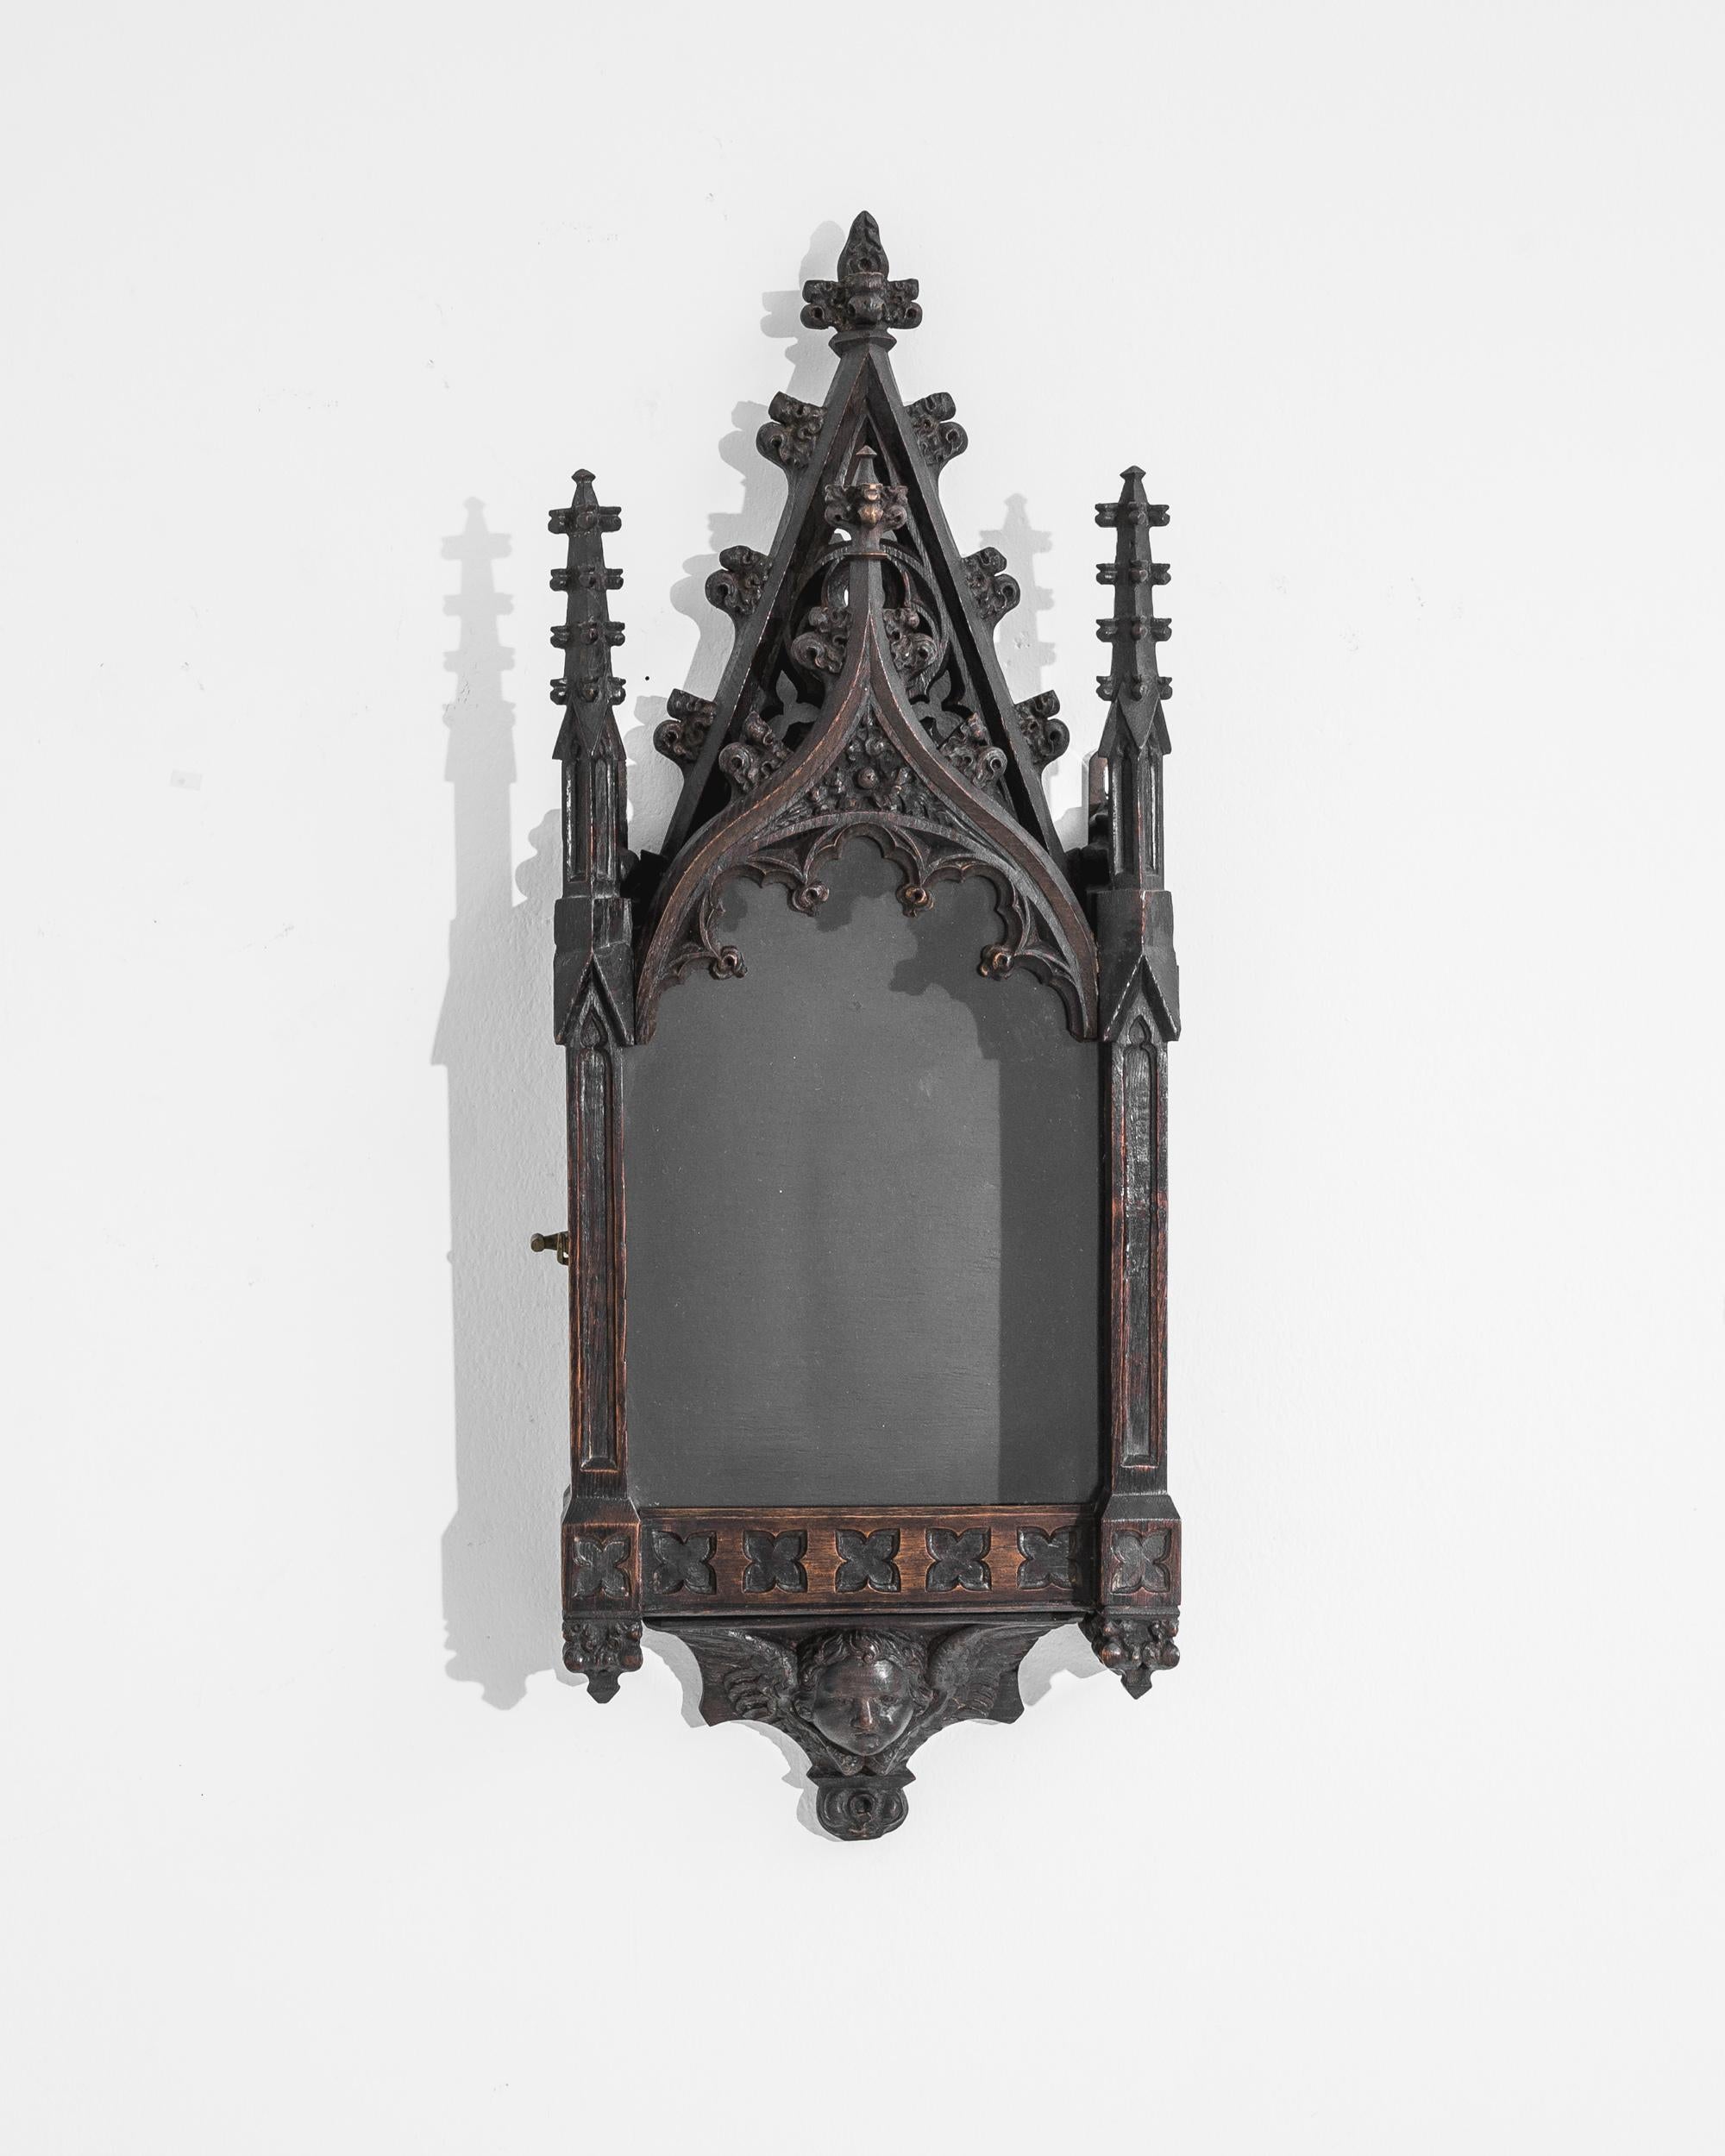 A small wooden display cabinet from 1900s France, this antique find flaunts an outstanding gothic inspired profile. Two solemn pillars flank an acute pinnacle, crowning a central glass door garnished with hand carved ornamentations. A frieze of